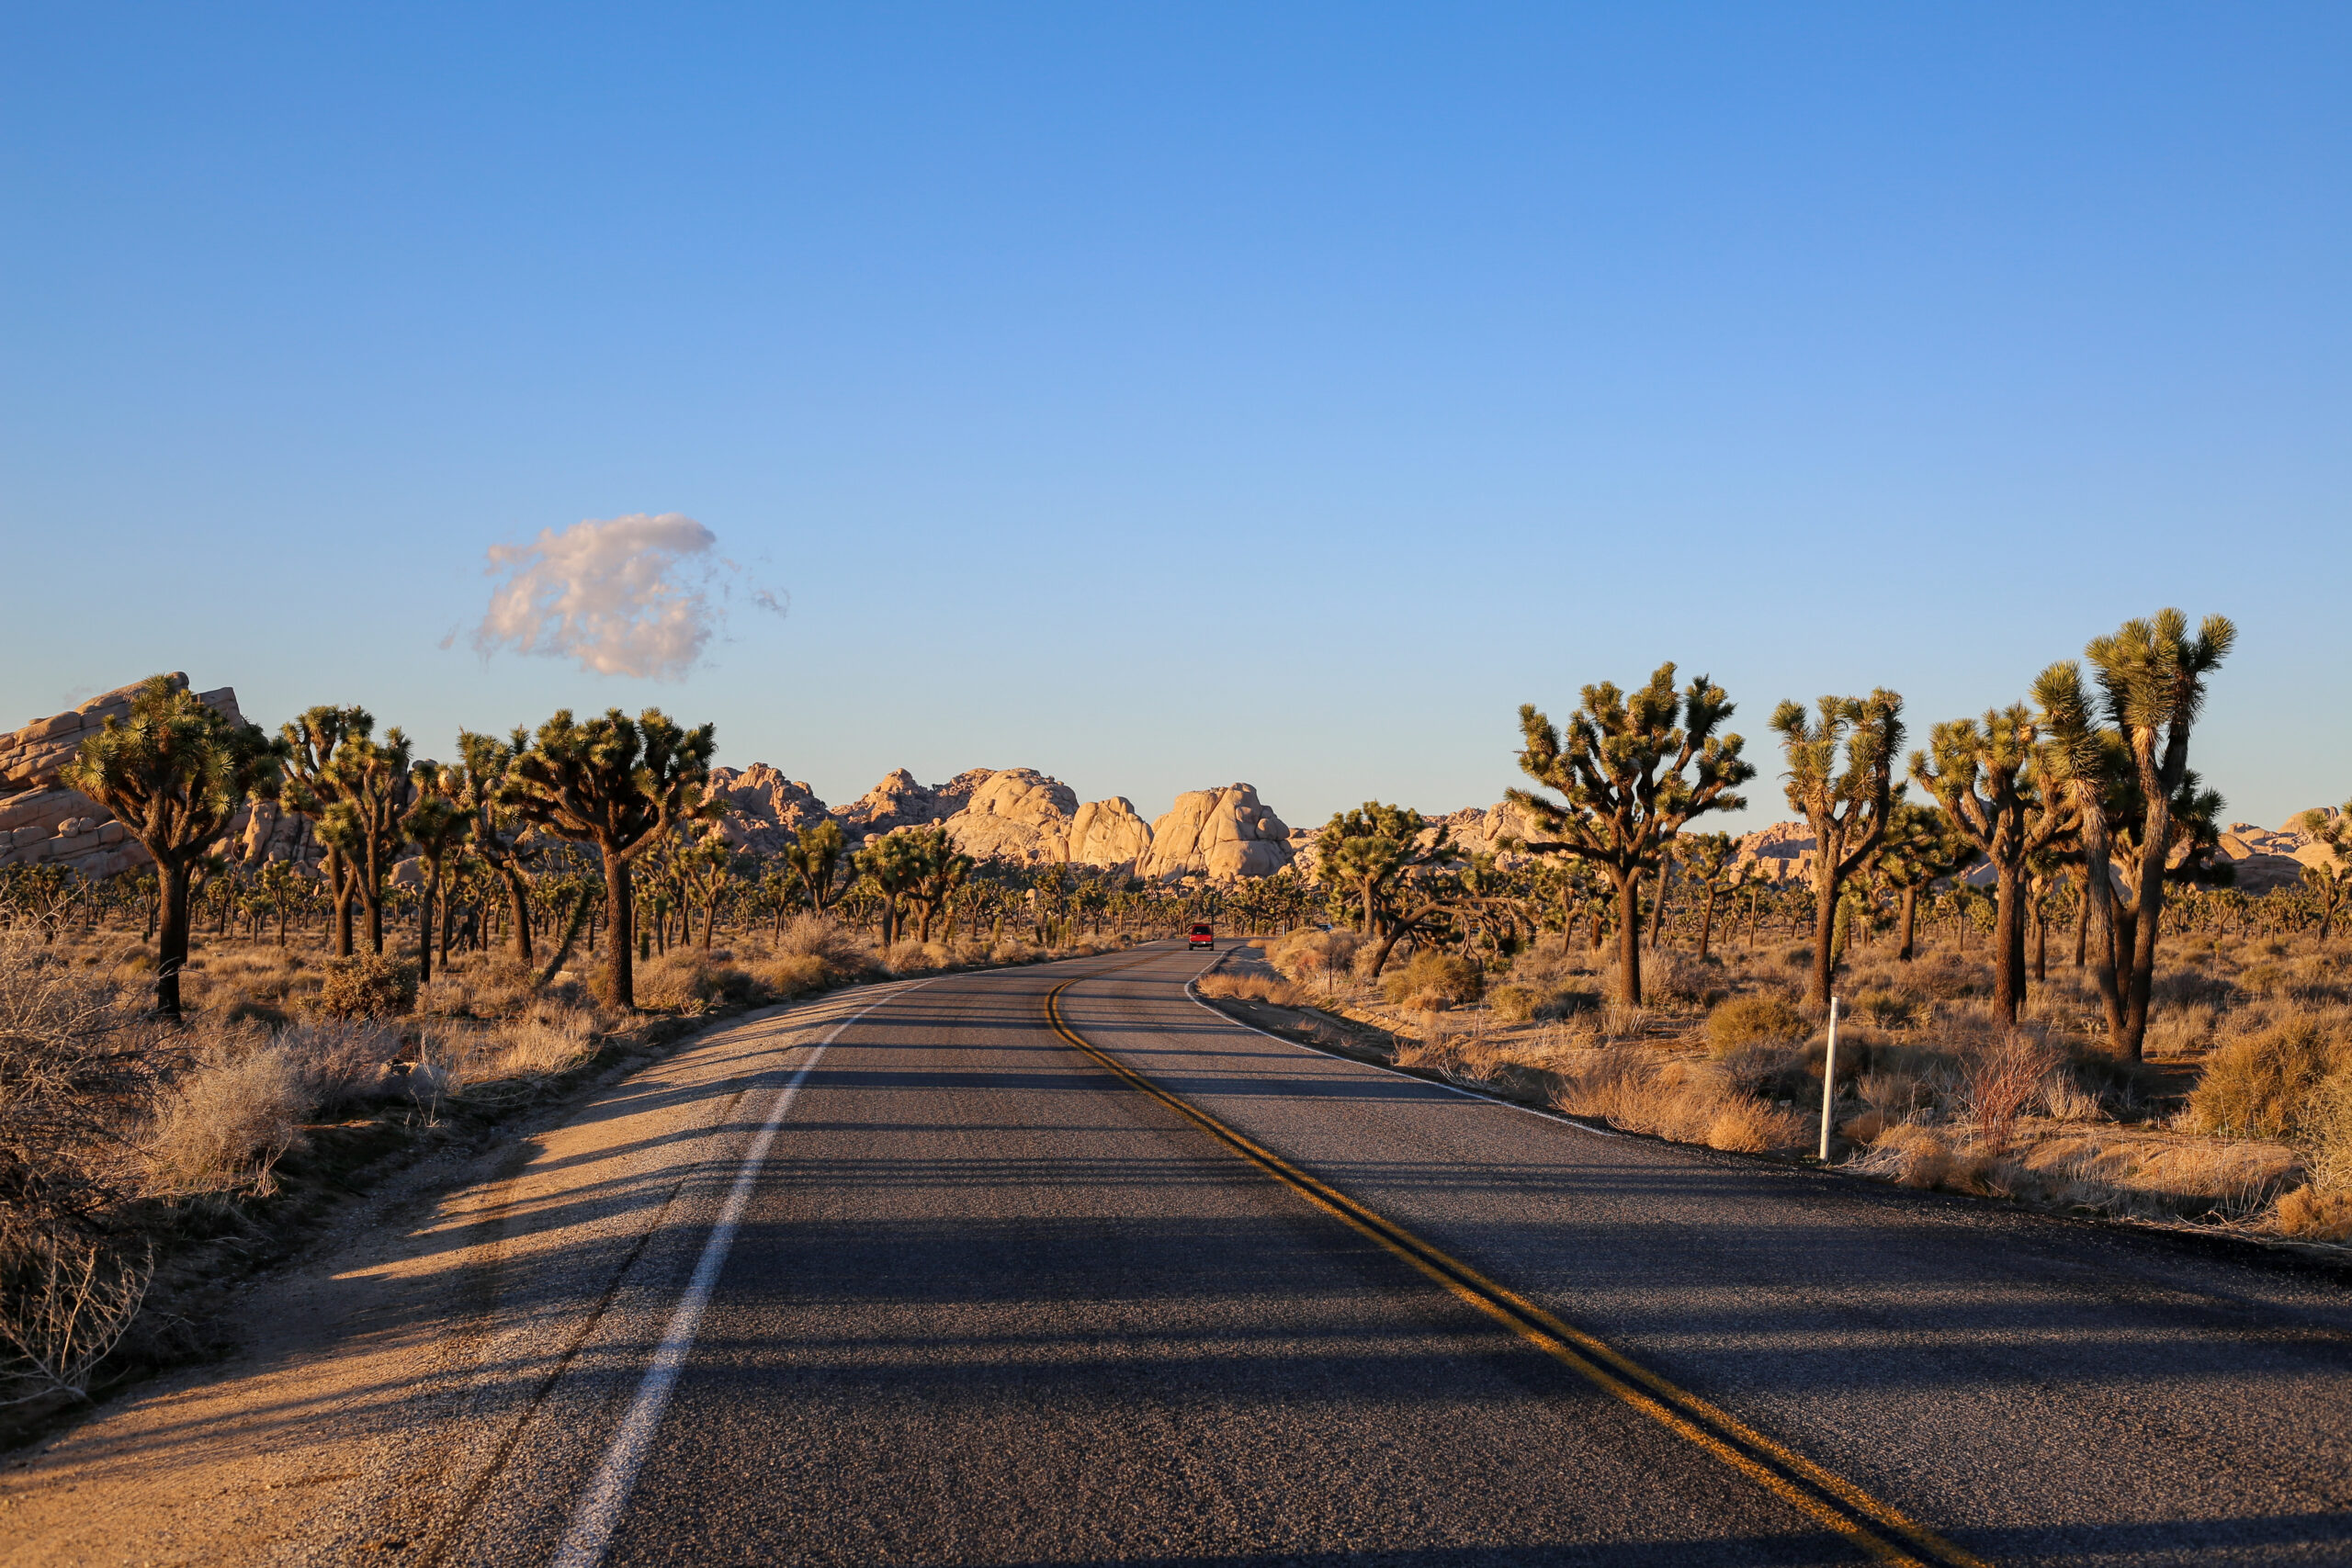 Large Joshua Trees flanking the main paved road with boulders in the distance in Joshua Tree National Park, California.